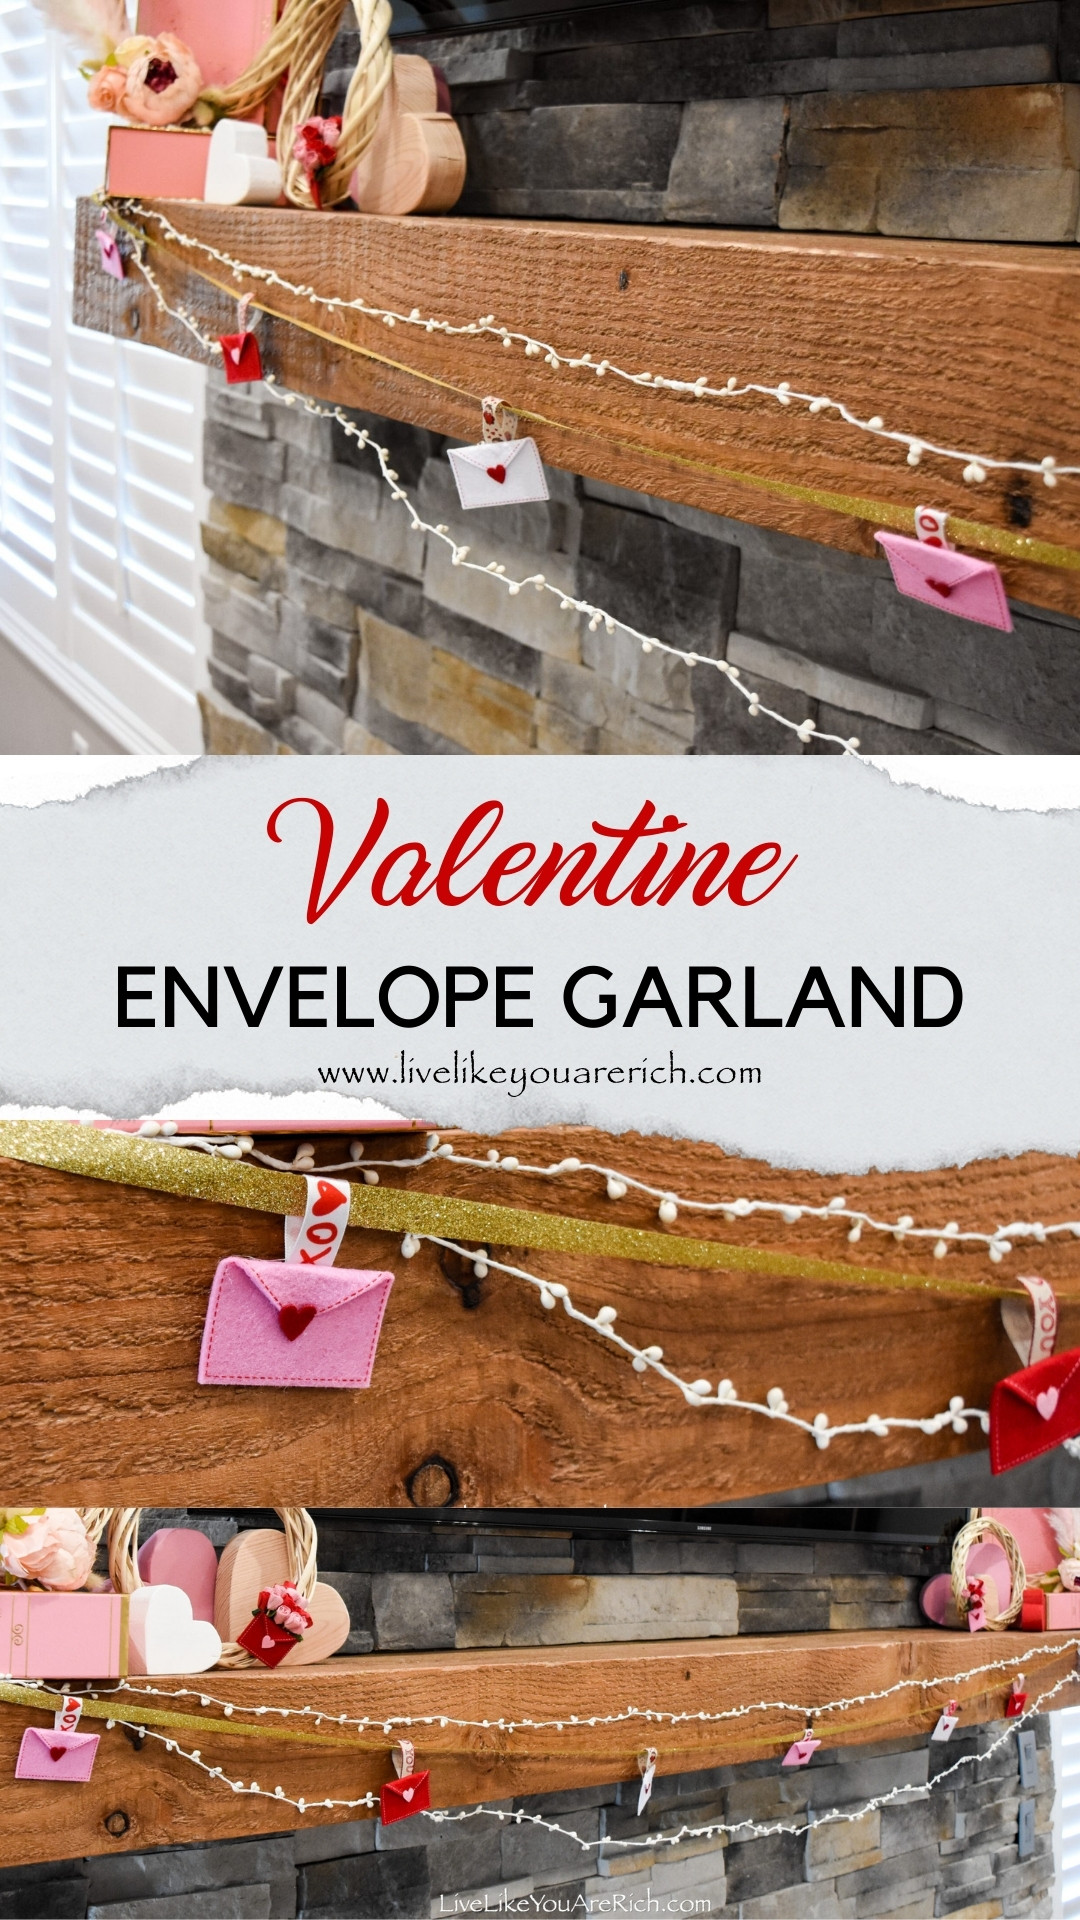 Valentine Envelope Garland. This garland was extremely easy and fun to make. It requires just a few supplies. Supply List for this Valentine Envelope Garland Glue gun and glue sticks I had these. 